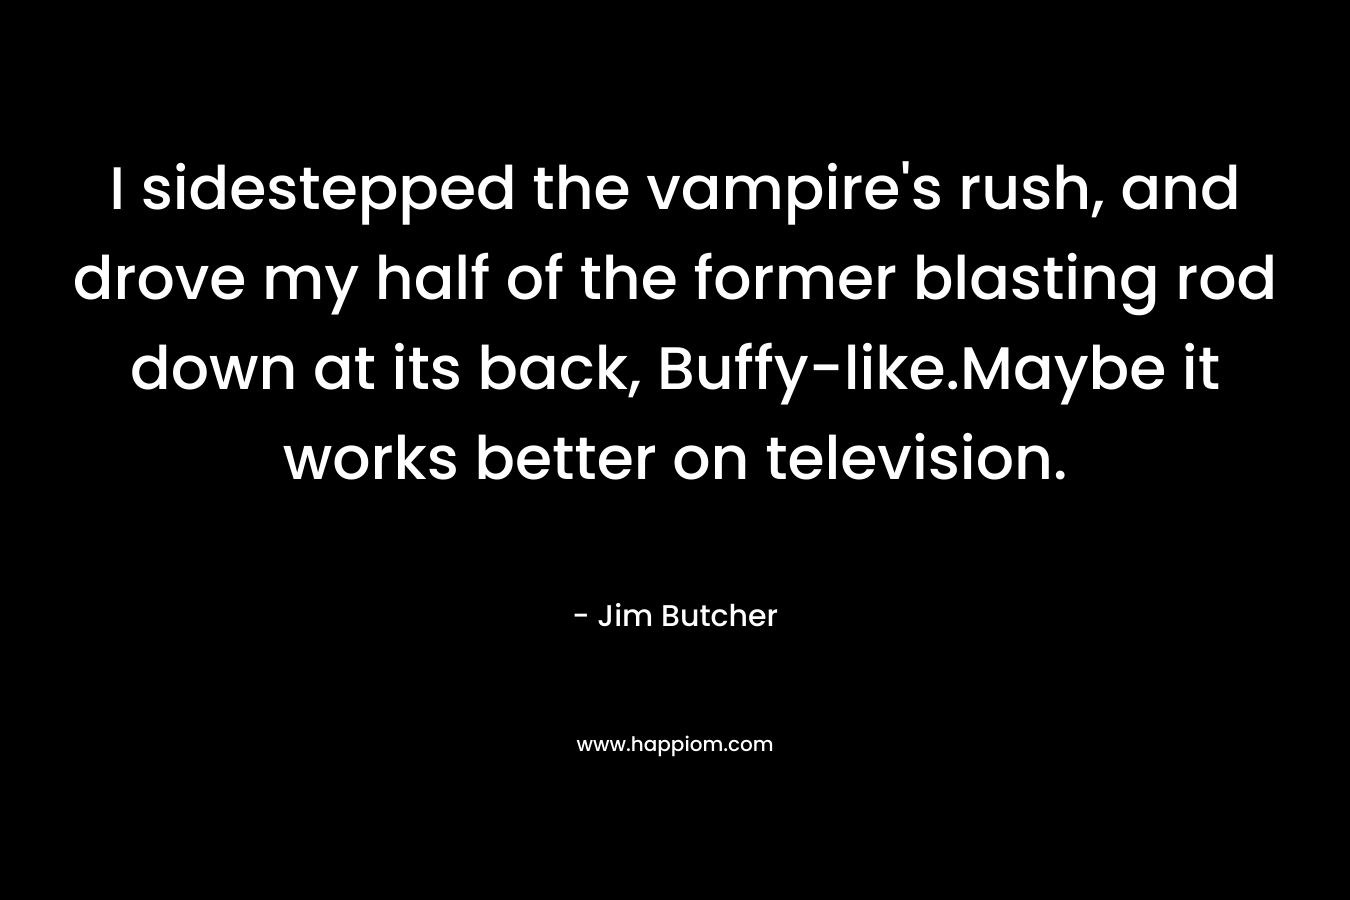 I sidestepped the vampire's rush, and drove my half of the former blasting rod down at its back, Buffy-like.Maybe it works better on television.